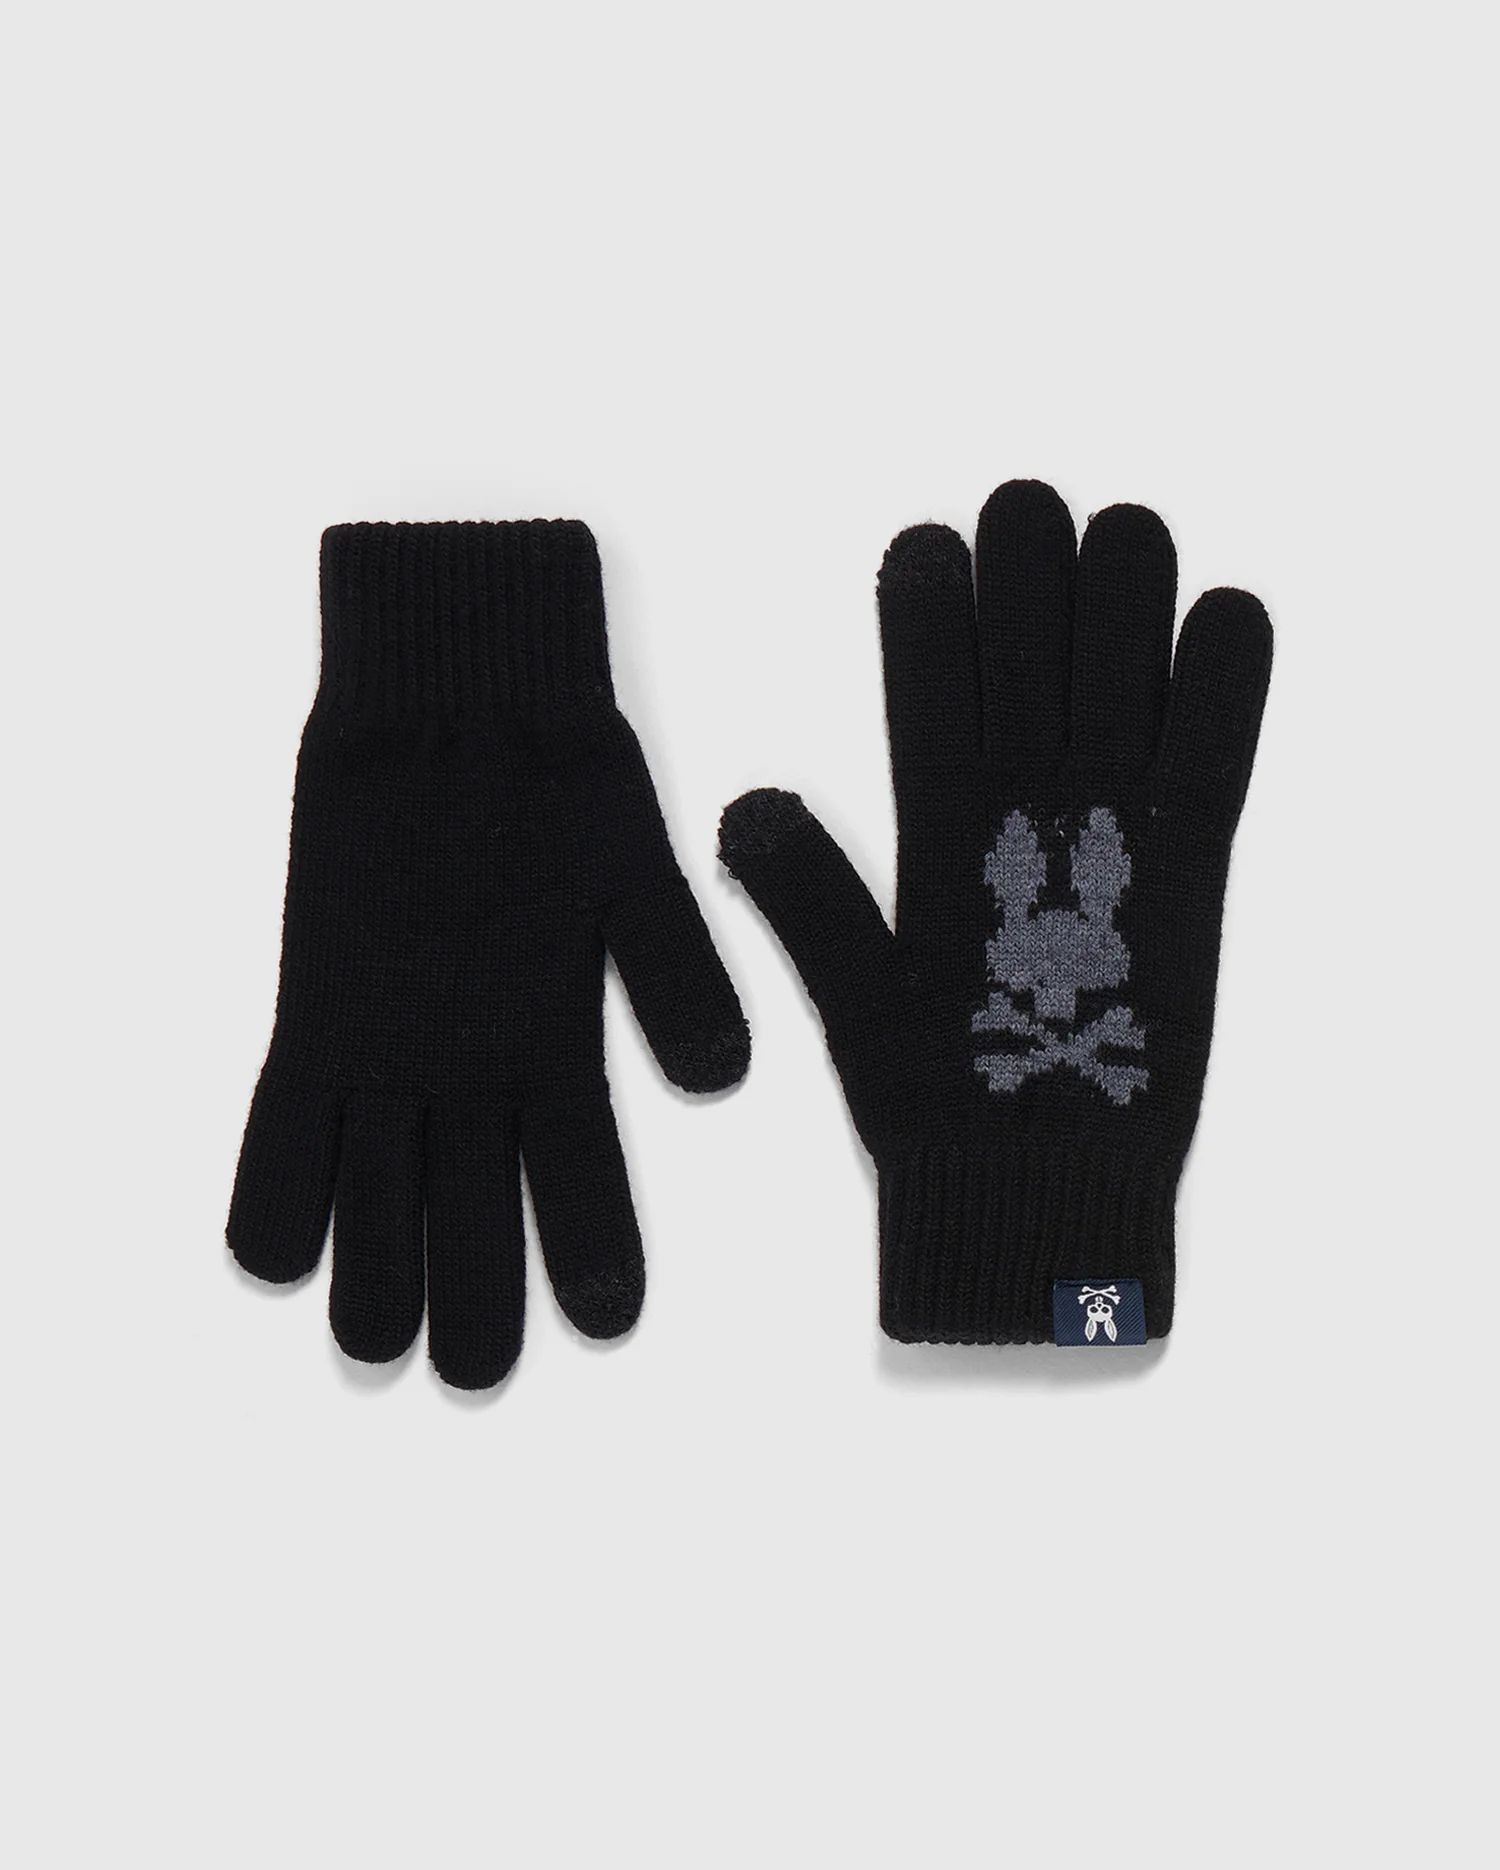 MENS WOOL GLOVES WITH BLACK FINGER TOUCH - B6A998U1GL | Psycho Bunny